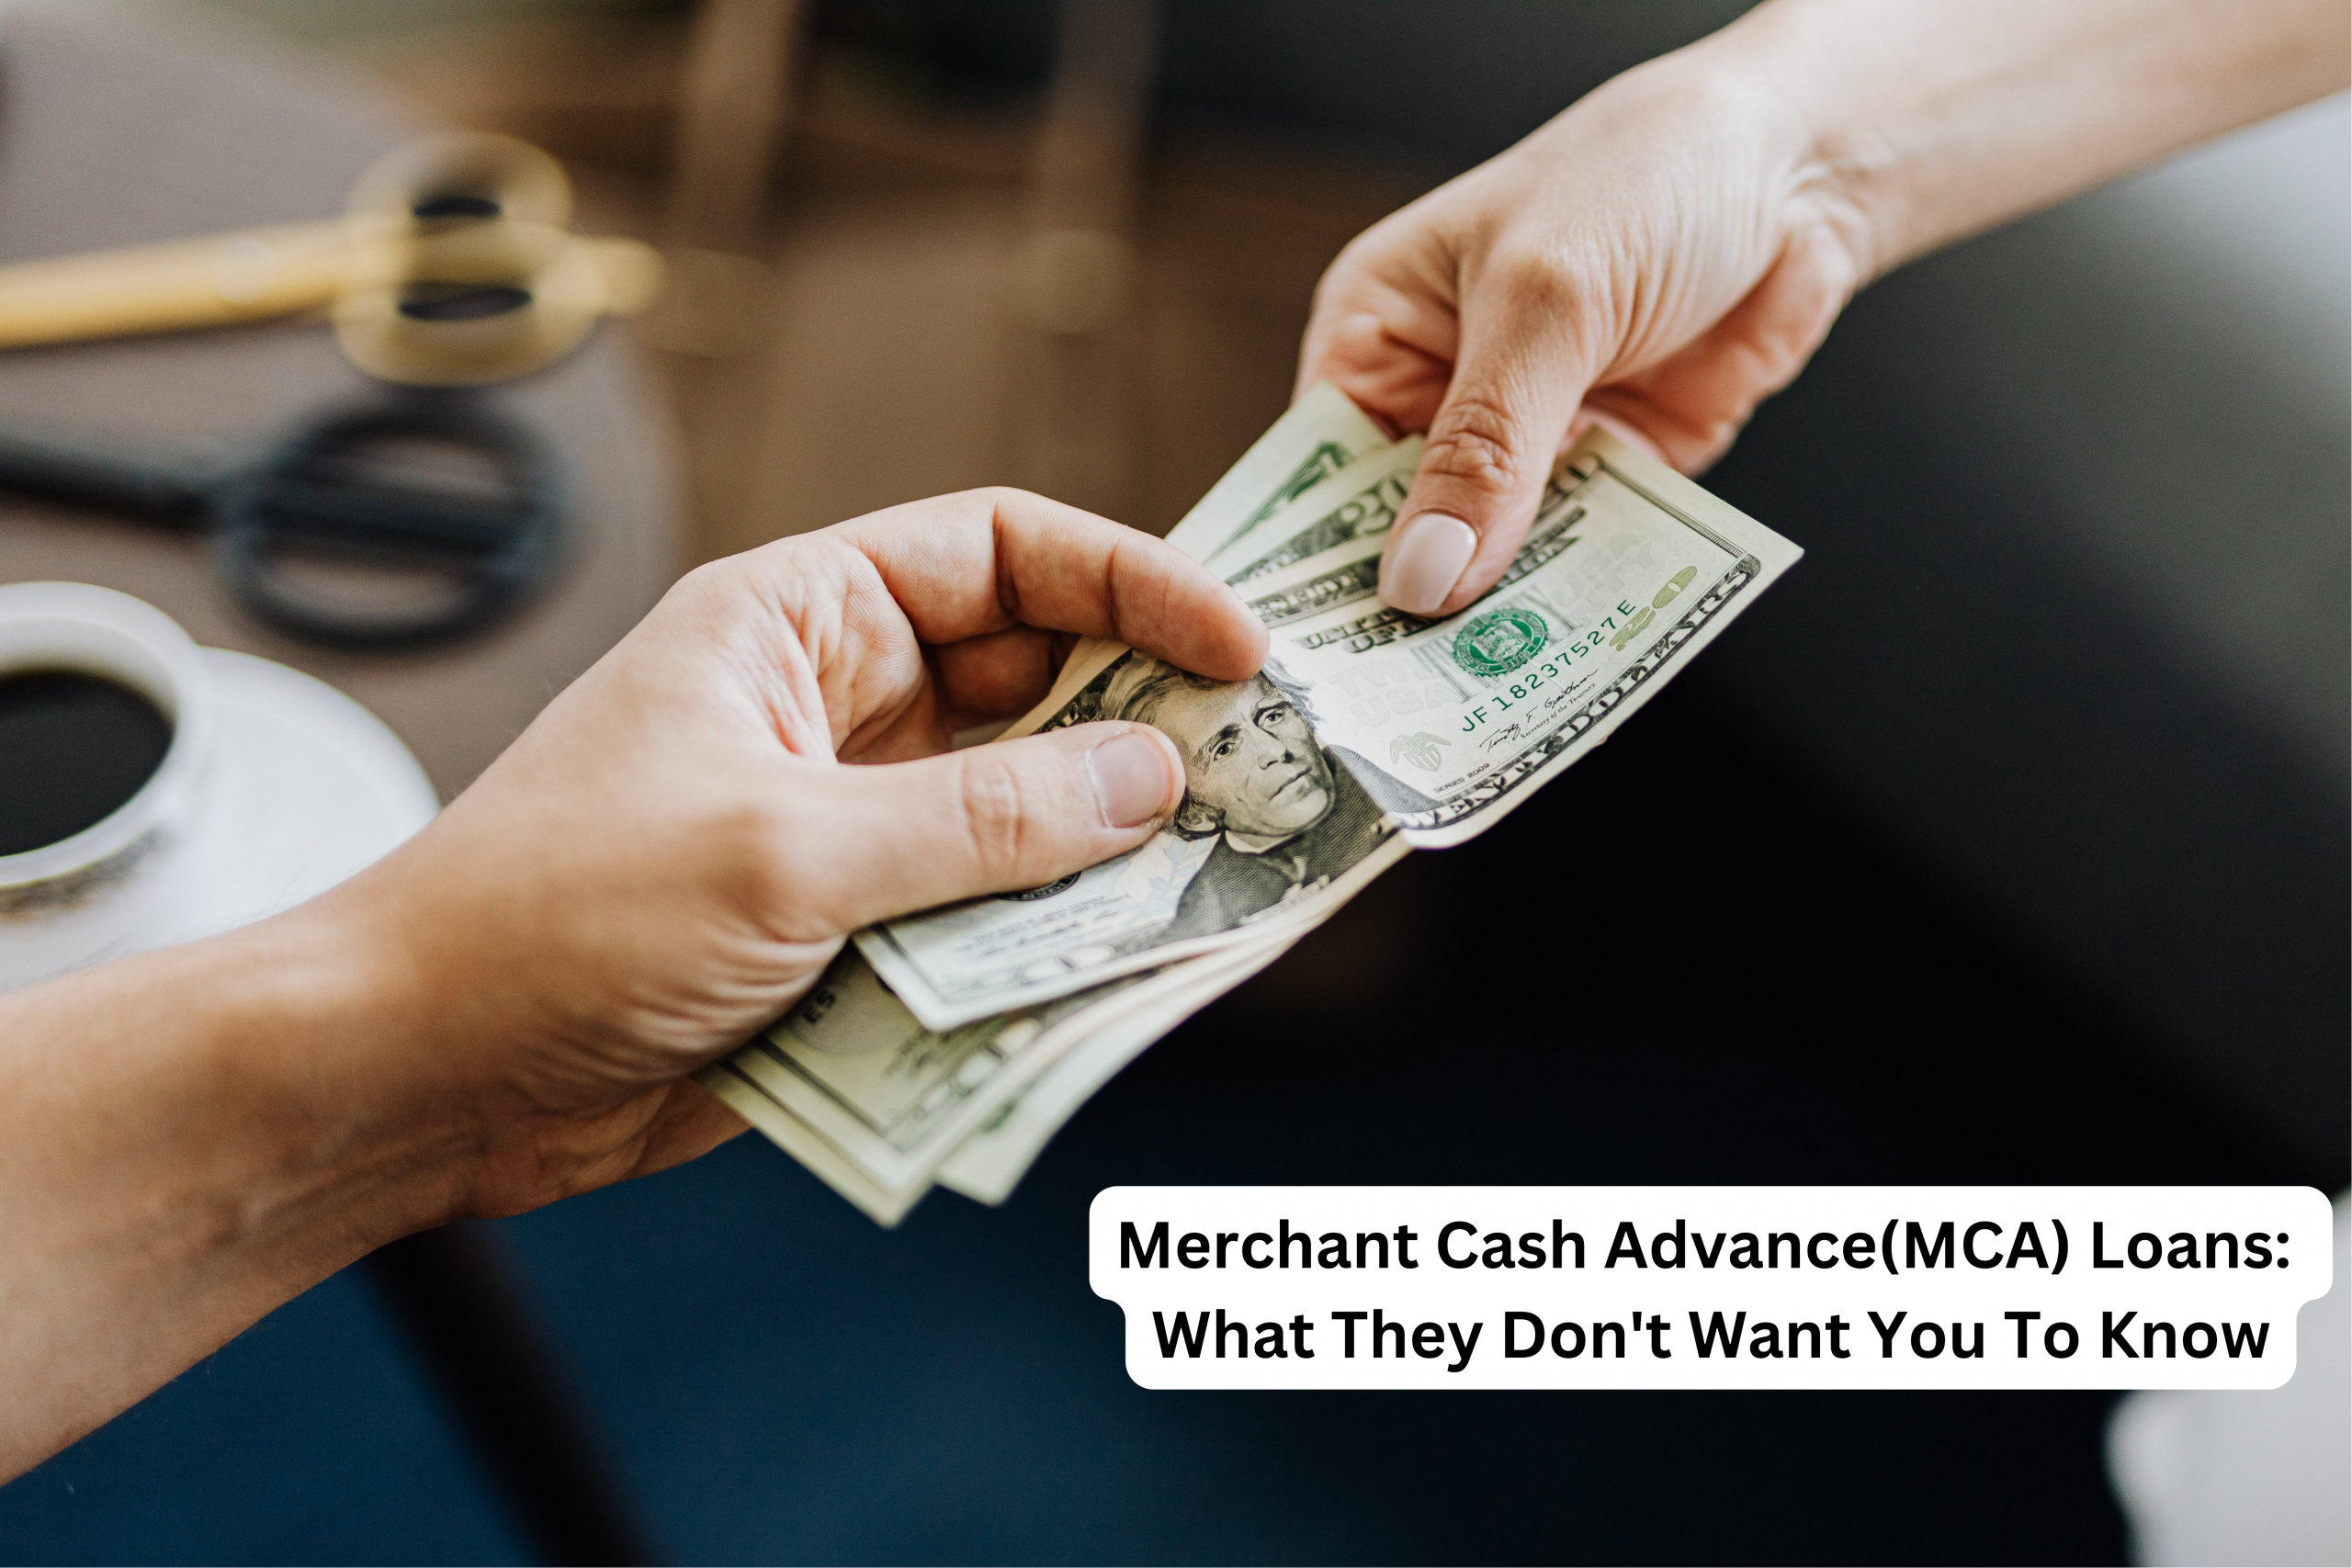 Merchant Cash Advance(MCA) Loans: What They Don't Want You To Know